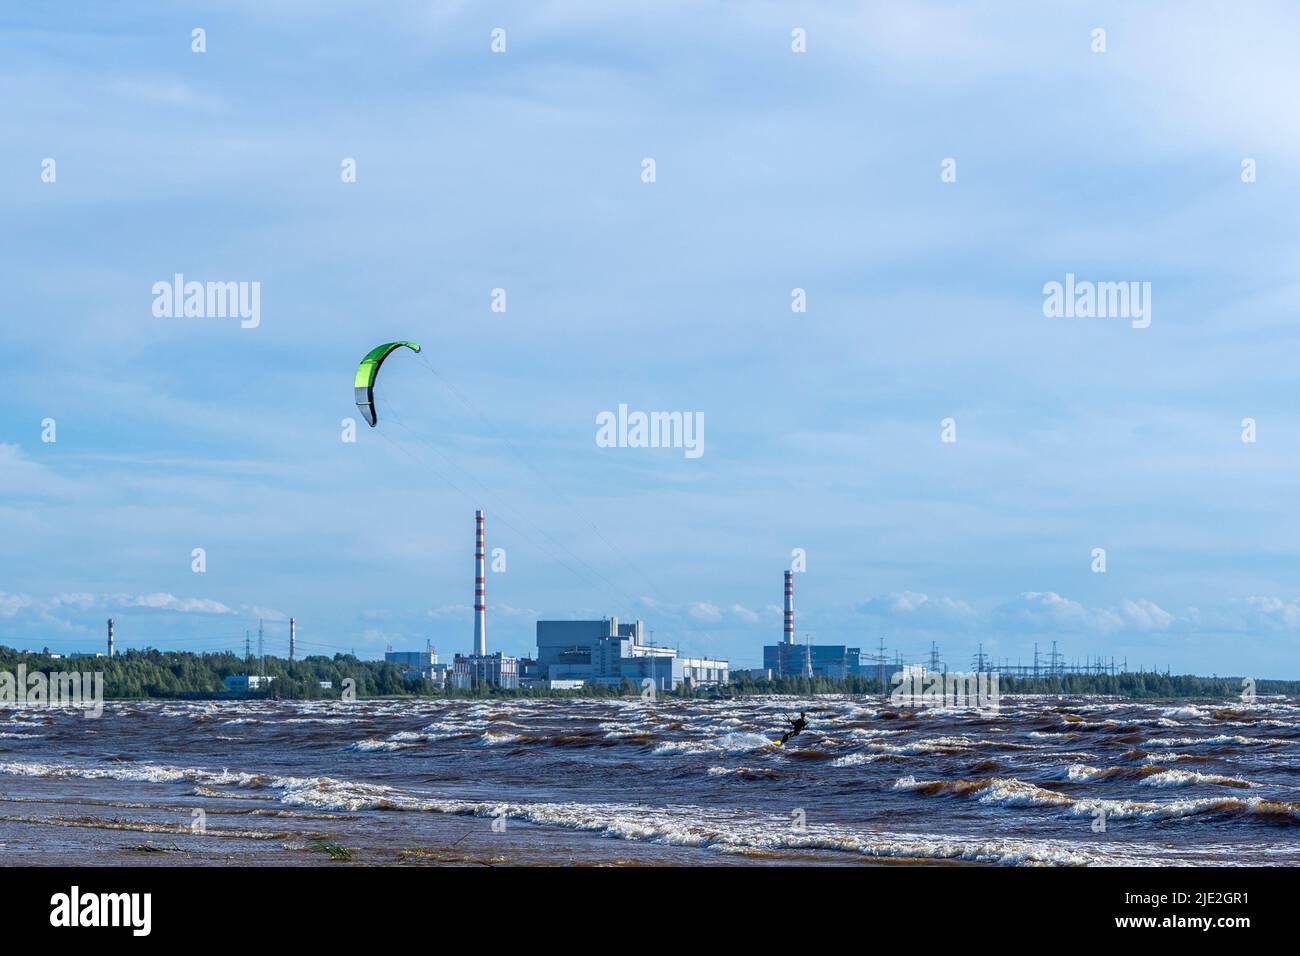 Kitesurfing at sea against the background of a nuclear power plant Stock Photo